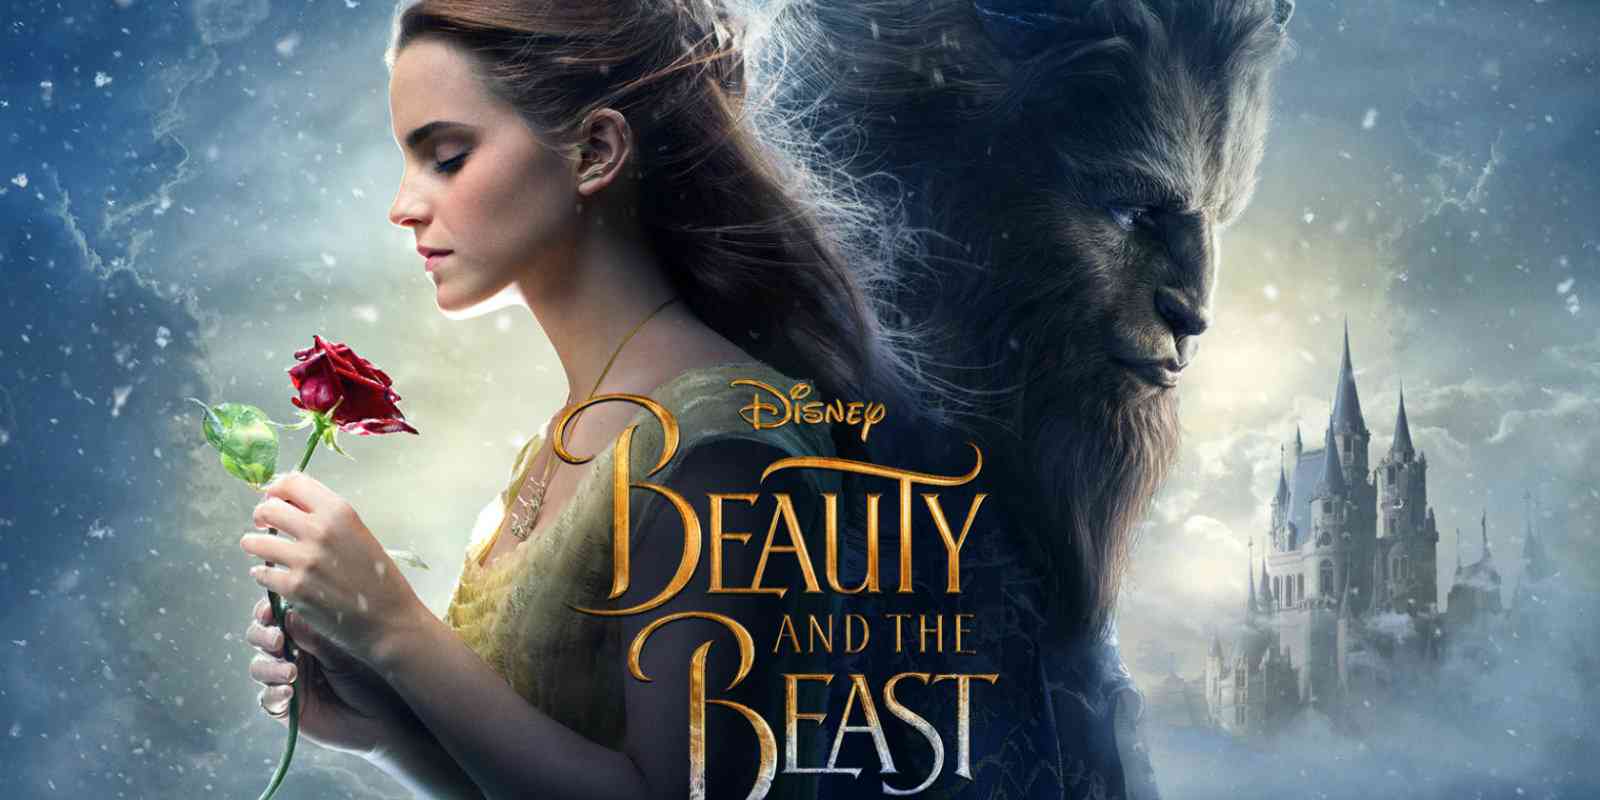 Beauty and the Beast Movie info